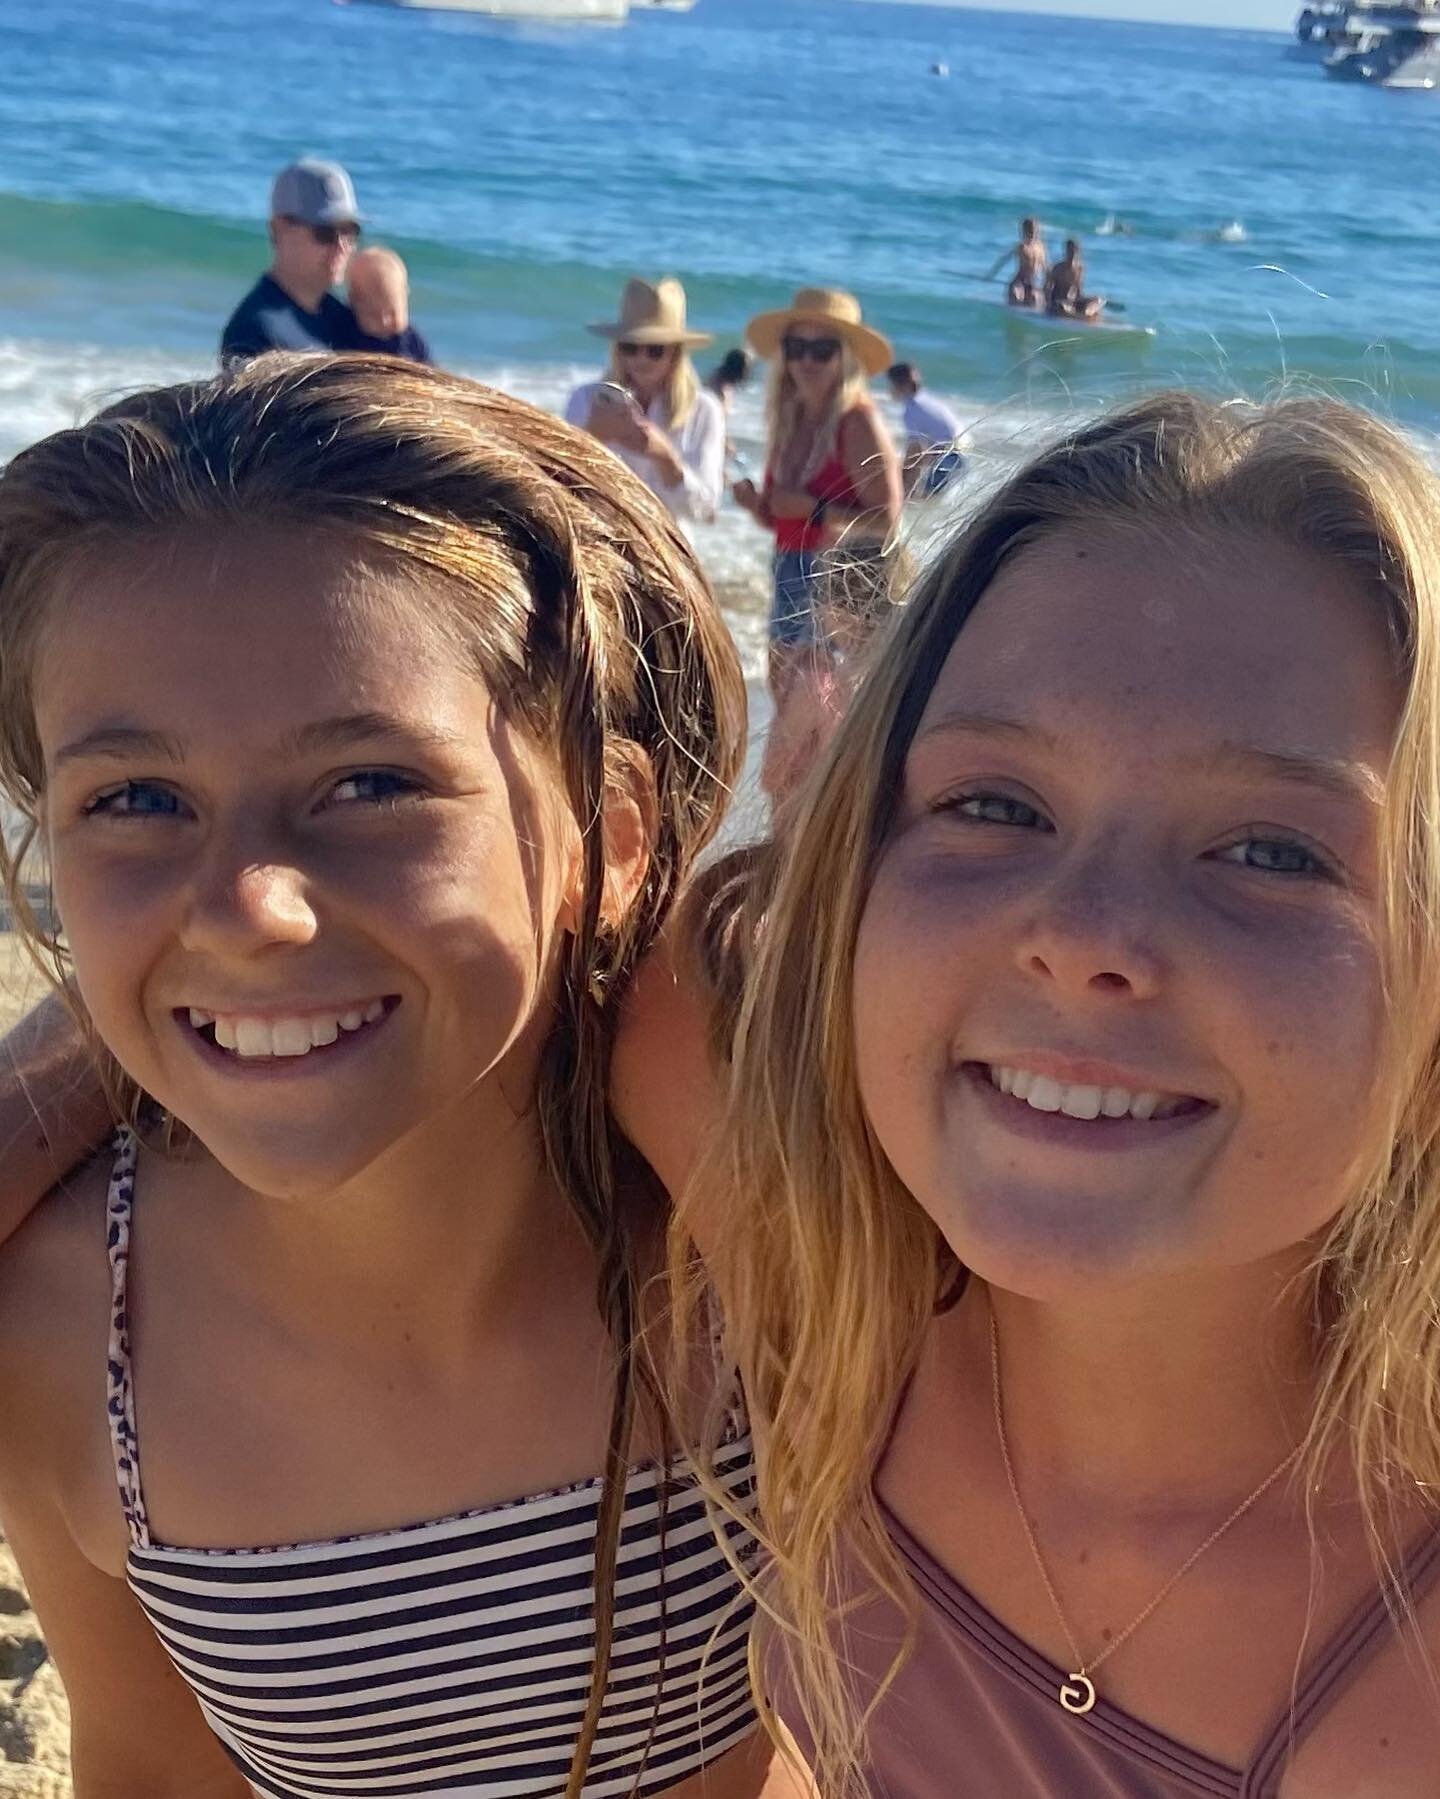 &ldquo;My name is Lydia Kimball from the Laguna Beach ward. I&rsquo;m 12 years old and just started 7th grade. This past June, my best friend Grace was baptized! She had been coming to church and youth activities with me for a little over a year when